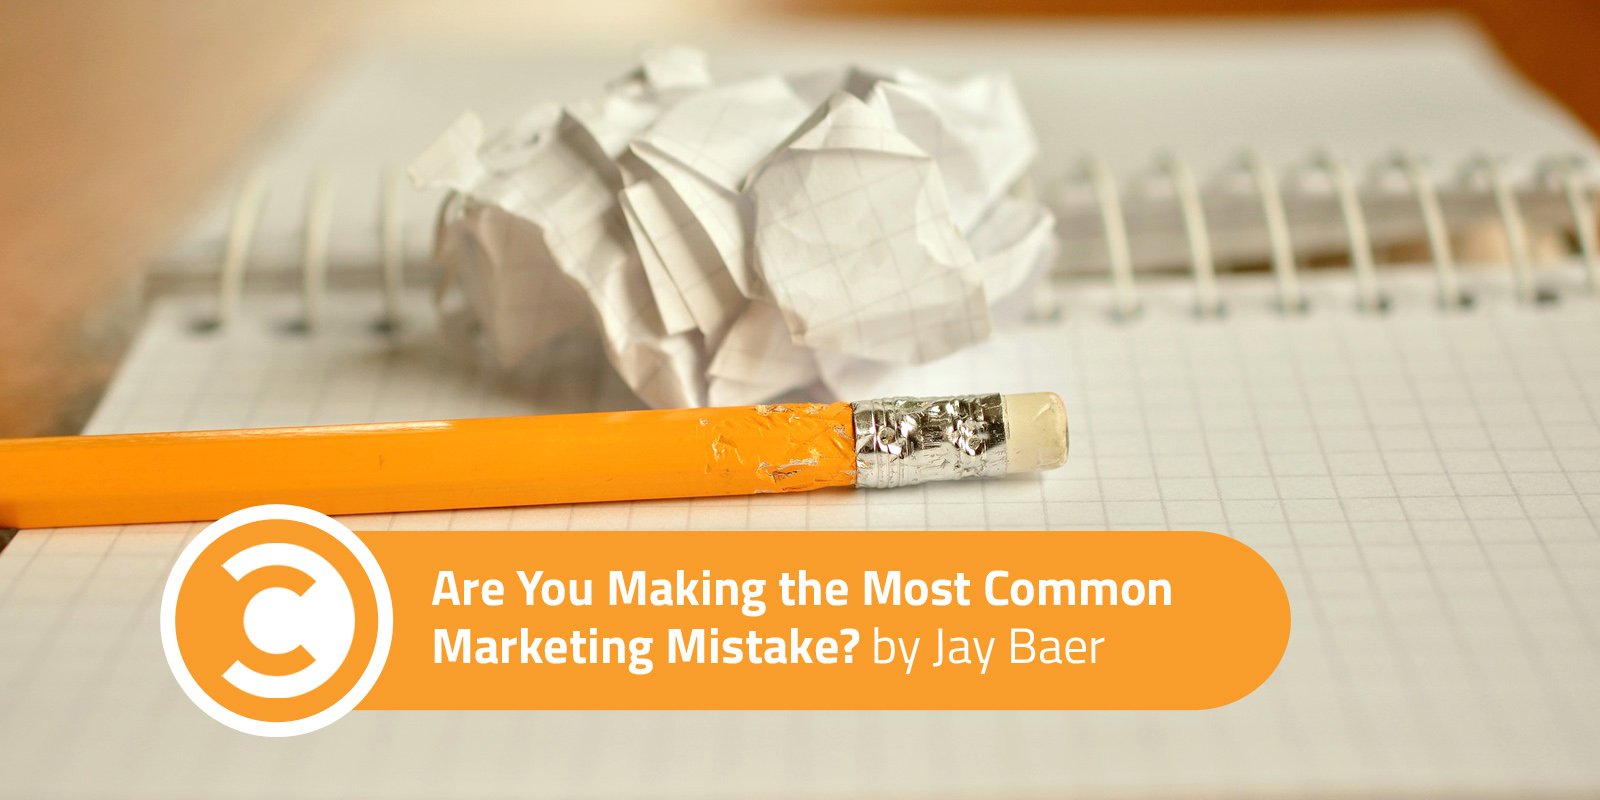 Are You Making the Most Common Marketing Mistake